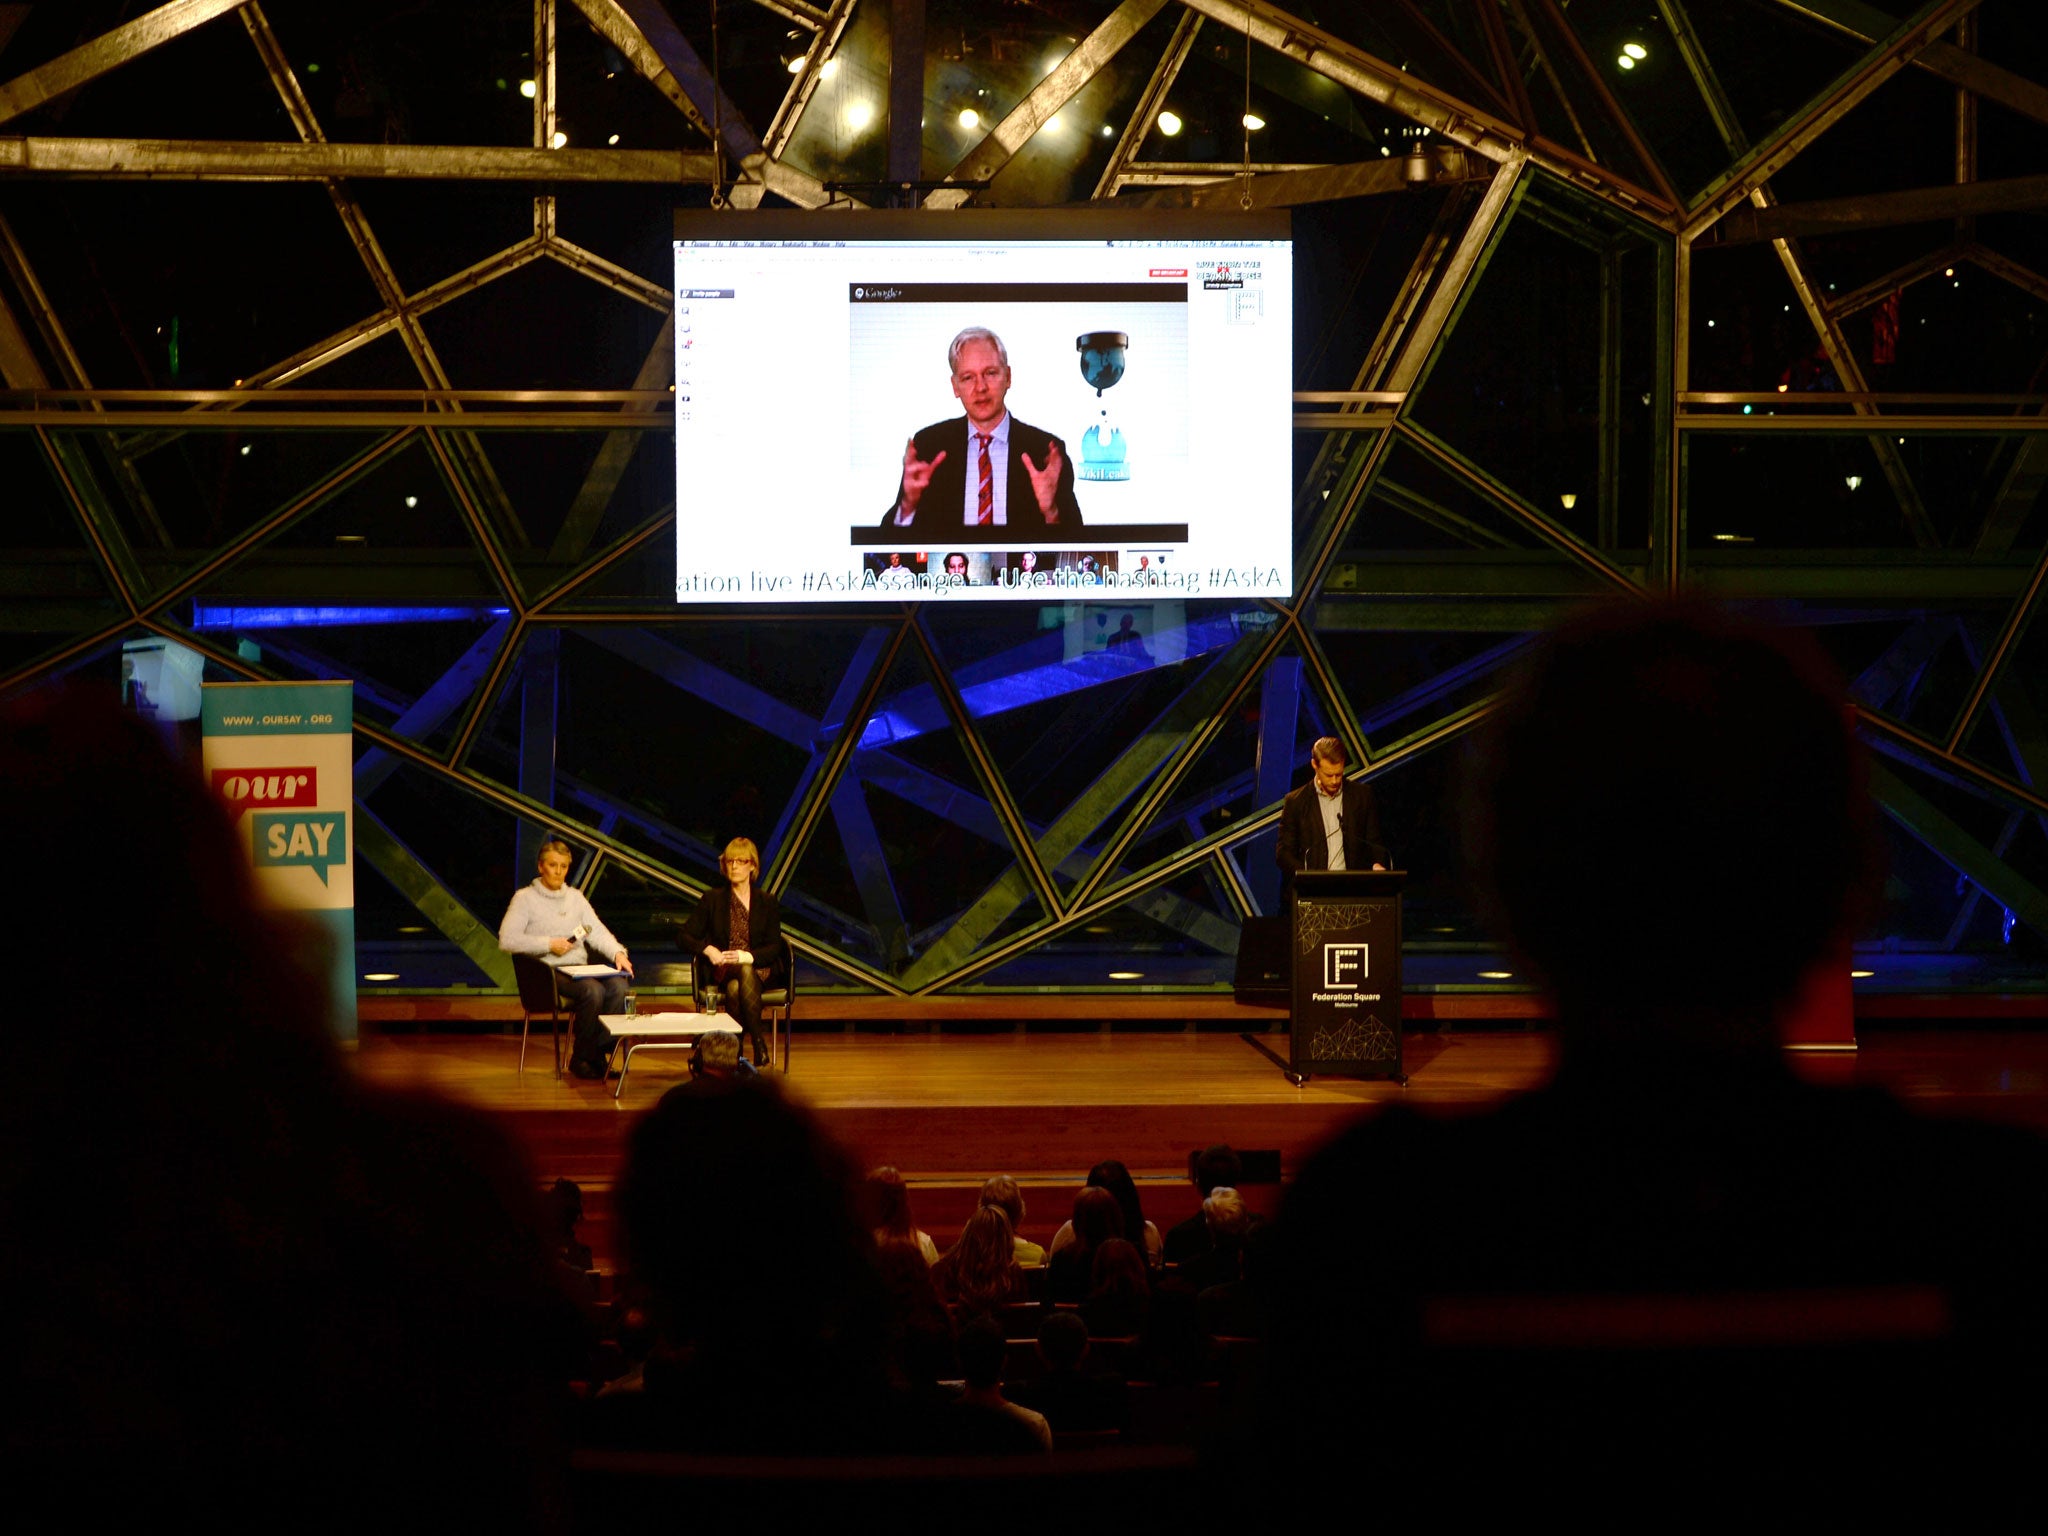 Julian Assange participates in a live question-and-answer session via Skype at a meeting in Melbourne